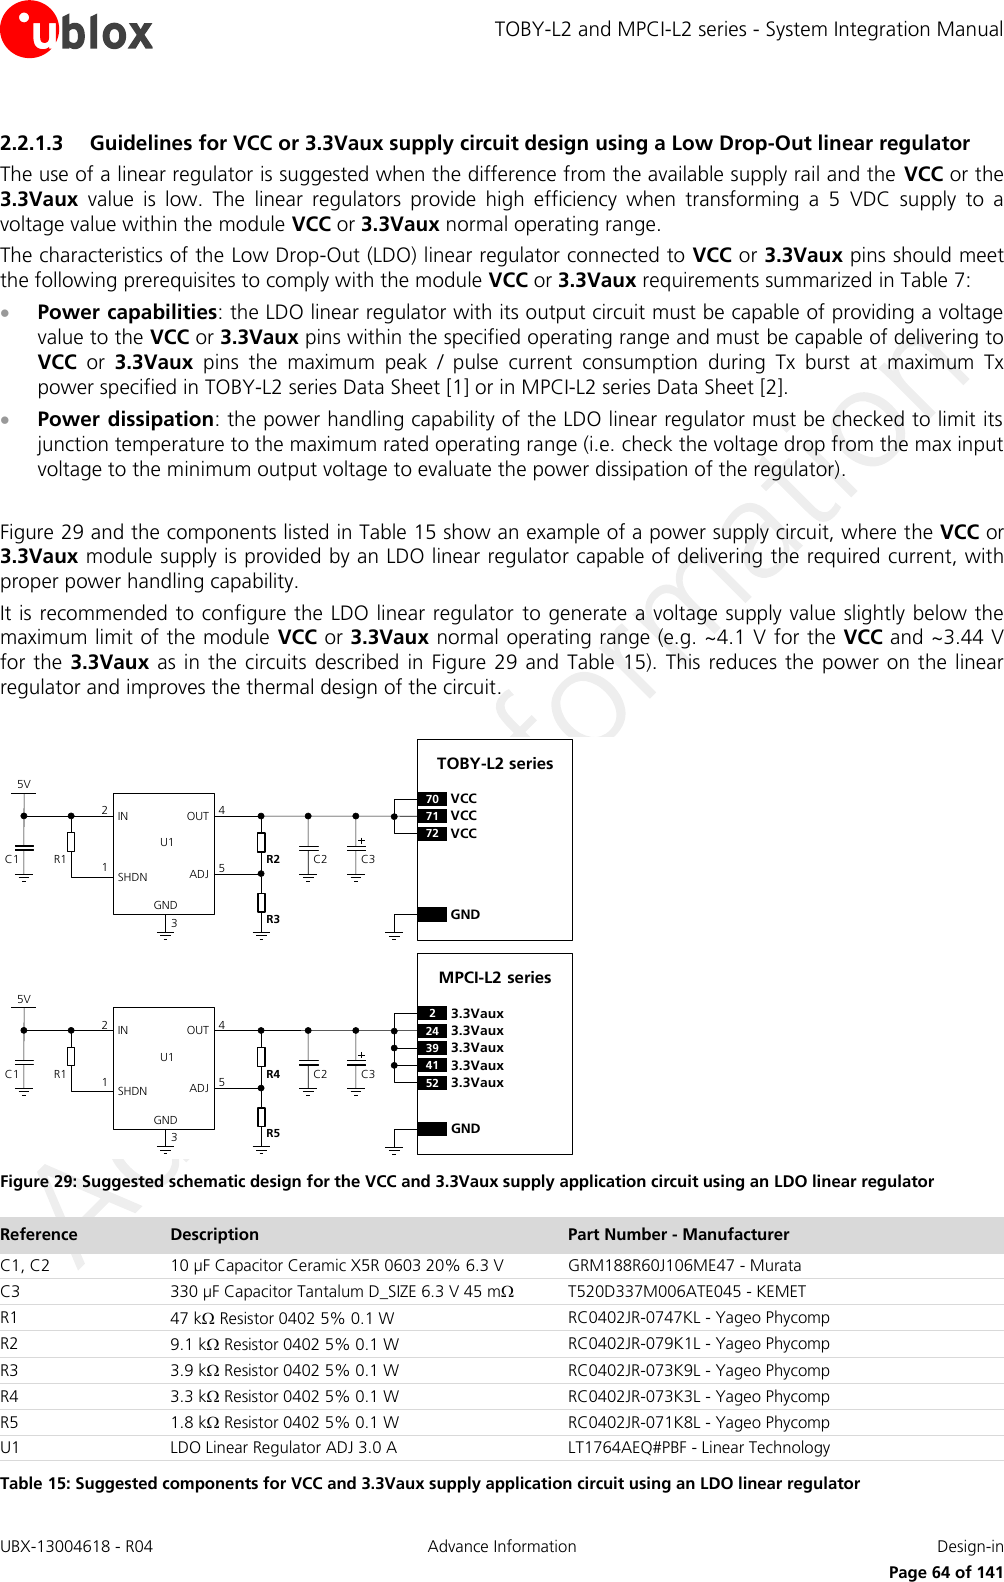 TOBY-L2 and MPCI-L2 series - System Integration Manual UBX-13004618 - R04  Advance Information  Design-in     Page 64 of 141 2.2.1.3 Guidelines for VCC or 3.3Vaux supply circuit design using a Low Drop-Out linear regulator The use of a linear regulator is suggested when the difference from the available supply rail and the  VCC or the 3.3Vaux  value  is  low.  The  linear  regulators  provide  high  efficiency  when  transforming  a  5  VDC  supply  to  a voltage value within the module VCC or 3.3Vaux normal operating range. The characteristics of the Low Drop-Out (LDO) linear regulator connected to VCC or 3.3Vaux pins should meet the following prerequisites to comply with the module VCC or 3.3Vaux requirements summarized in Table 7:  Power capabilities: the LDO linear regulator with its output circuit must be capable of providing a voltage value to the VCC or 3.3Vaux pins within the specified operating range and must be capable of delivering to VCC  or  3.3Vaux  pins  the  maximum  peak  /  pulse  current  consumption  during  Tx  burst  at  maximum  Tx power specified in TOBY-L2 series Data Sheet [1] or in MPCI-L2 series Data Sheet [2].  Power dissipation: the power handling capability of the LDO linear regulator must be checked to limit its junction temperature to the maximum rated operating range (i.e. check the voltage drop from the max input voltage to the minimum output voltage to evaluate the power dissipation of the regulator).  Figure 29 and the components listed in Table 15 show an example of a power supply circuit, where the VCC or 3.3Vaux module supply is provided by an LDO linear regulator capable of delivering the required current, with proper power handling capability. It is recommended to configure the LDO linear regulator  to generate a voltage supply value slightly below the maximum limit of the module VCC or 3.3Vaux normal operating range (e.g. ~4.1 V for the VCC and ~3.44 V for the 3.3Vaux  as  in the circuits described  in  Figure 29 and  Table  15). This reduces  the  power on the  linear regulator and improves the thermal design of the circuit.  5VC1 R1IN OUTADJGND12453C2R2R3U1SHDNTOBY-L2 series71 VCC72 VCC70 VCCGNDC35VC1 R1IN OUTADJGND12453C2R4R5U1SHDNMPCI-L2 seriesGNDC324 3.3Vaux39 3.3Vaux23.3Vaux41 3.3Vaux52 3.3Vaux Figure 29: Suggested schematic design for the VCC and 3.3Vaux supply application circuit using an LDO linear regulator Reference Description Part Number - Manufacturer C1, C2 10 µF Capacitor Ceramic X5R 0603 20% 6.3 V GRM188R60J106ME47 - Murata C3 330 µF Capacitor Tantalum D_SIZE 6.3 V 45 m T520D337M006ATE045 - KEMET R1 47 k Resistor 0402 5% 0.1 W RC0402JR-0747KL - Yageo Phycomp R2 9.1 k Resistor 0402 5% 0.1 W RC0402JR-079K1L - Yageo Phycomp R3 3.9 k Resistor 0402 5% 0.1 W RC0402JR-073K9L - Yageo Phycomp R4 3.3 k Resistor 0402 5% 0.1 W RC0402JR-073K3L - Yageo Phycomp R5 1.8 k Resistor 0402 5% 0.1 W RC0402JR-071K8L - Yageo Phycomp U1 LDO Linear Regulator ADJ 3.0 A LT1764AEQ#PBF - Linear Technology Table 15: Suggested components for VCC and 3.3Vaux supply application circuit using an LDO linear regulator 